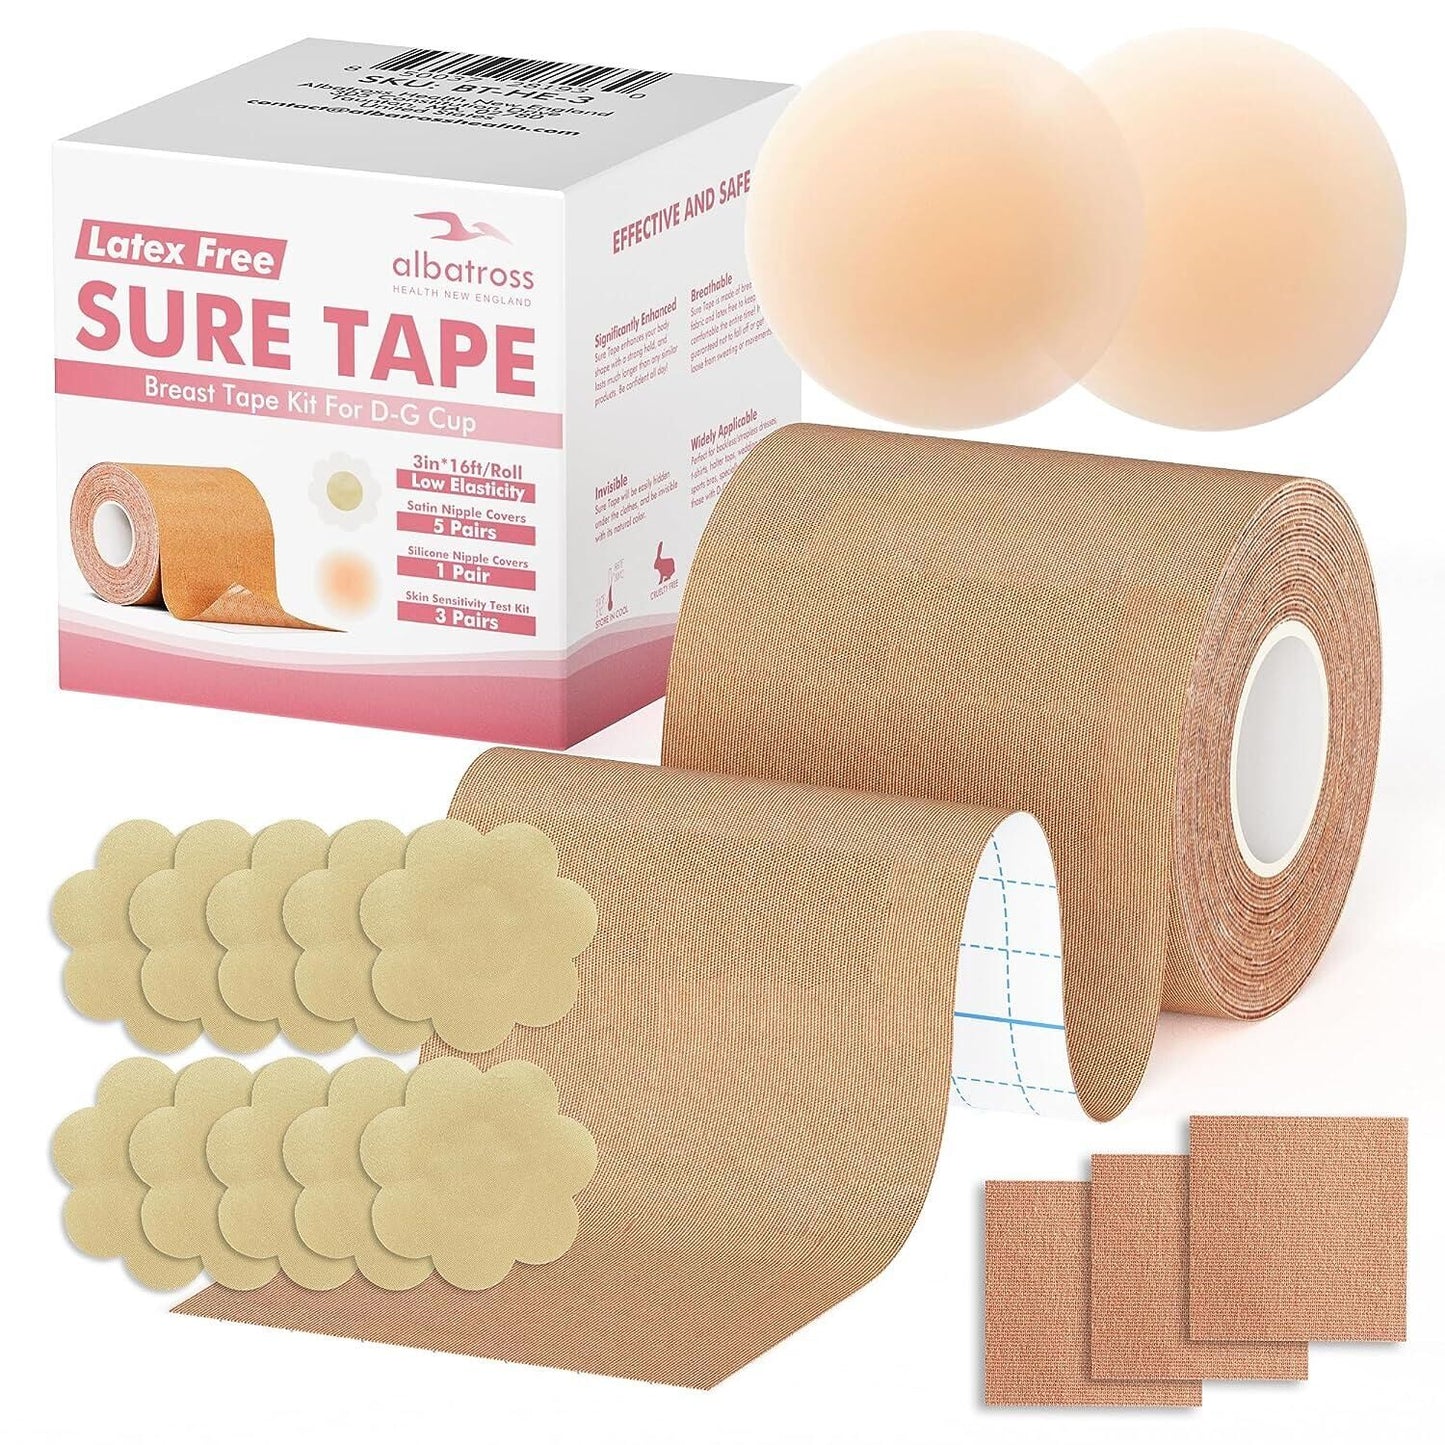 Sure Tape Breast Lift Tape for Larger Breast D-G Cup